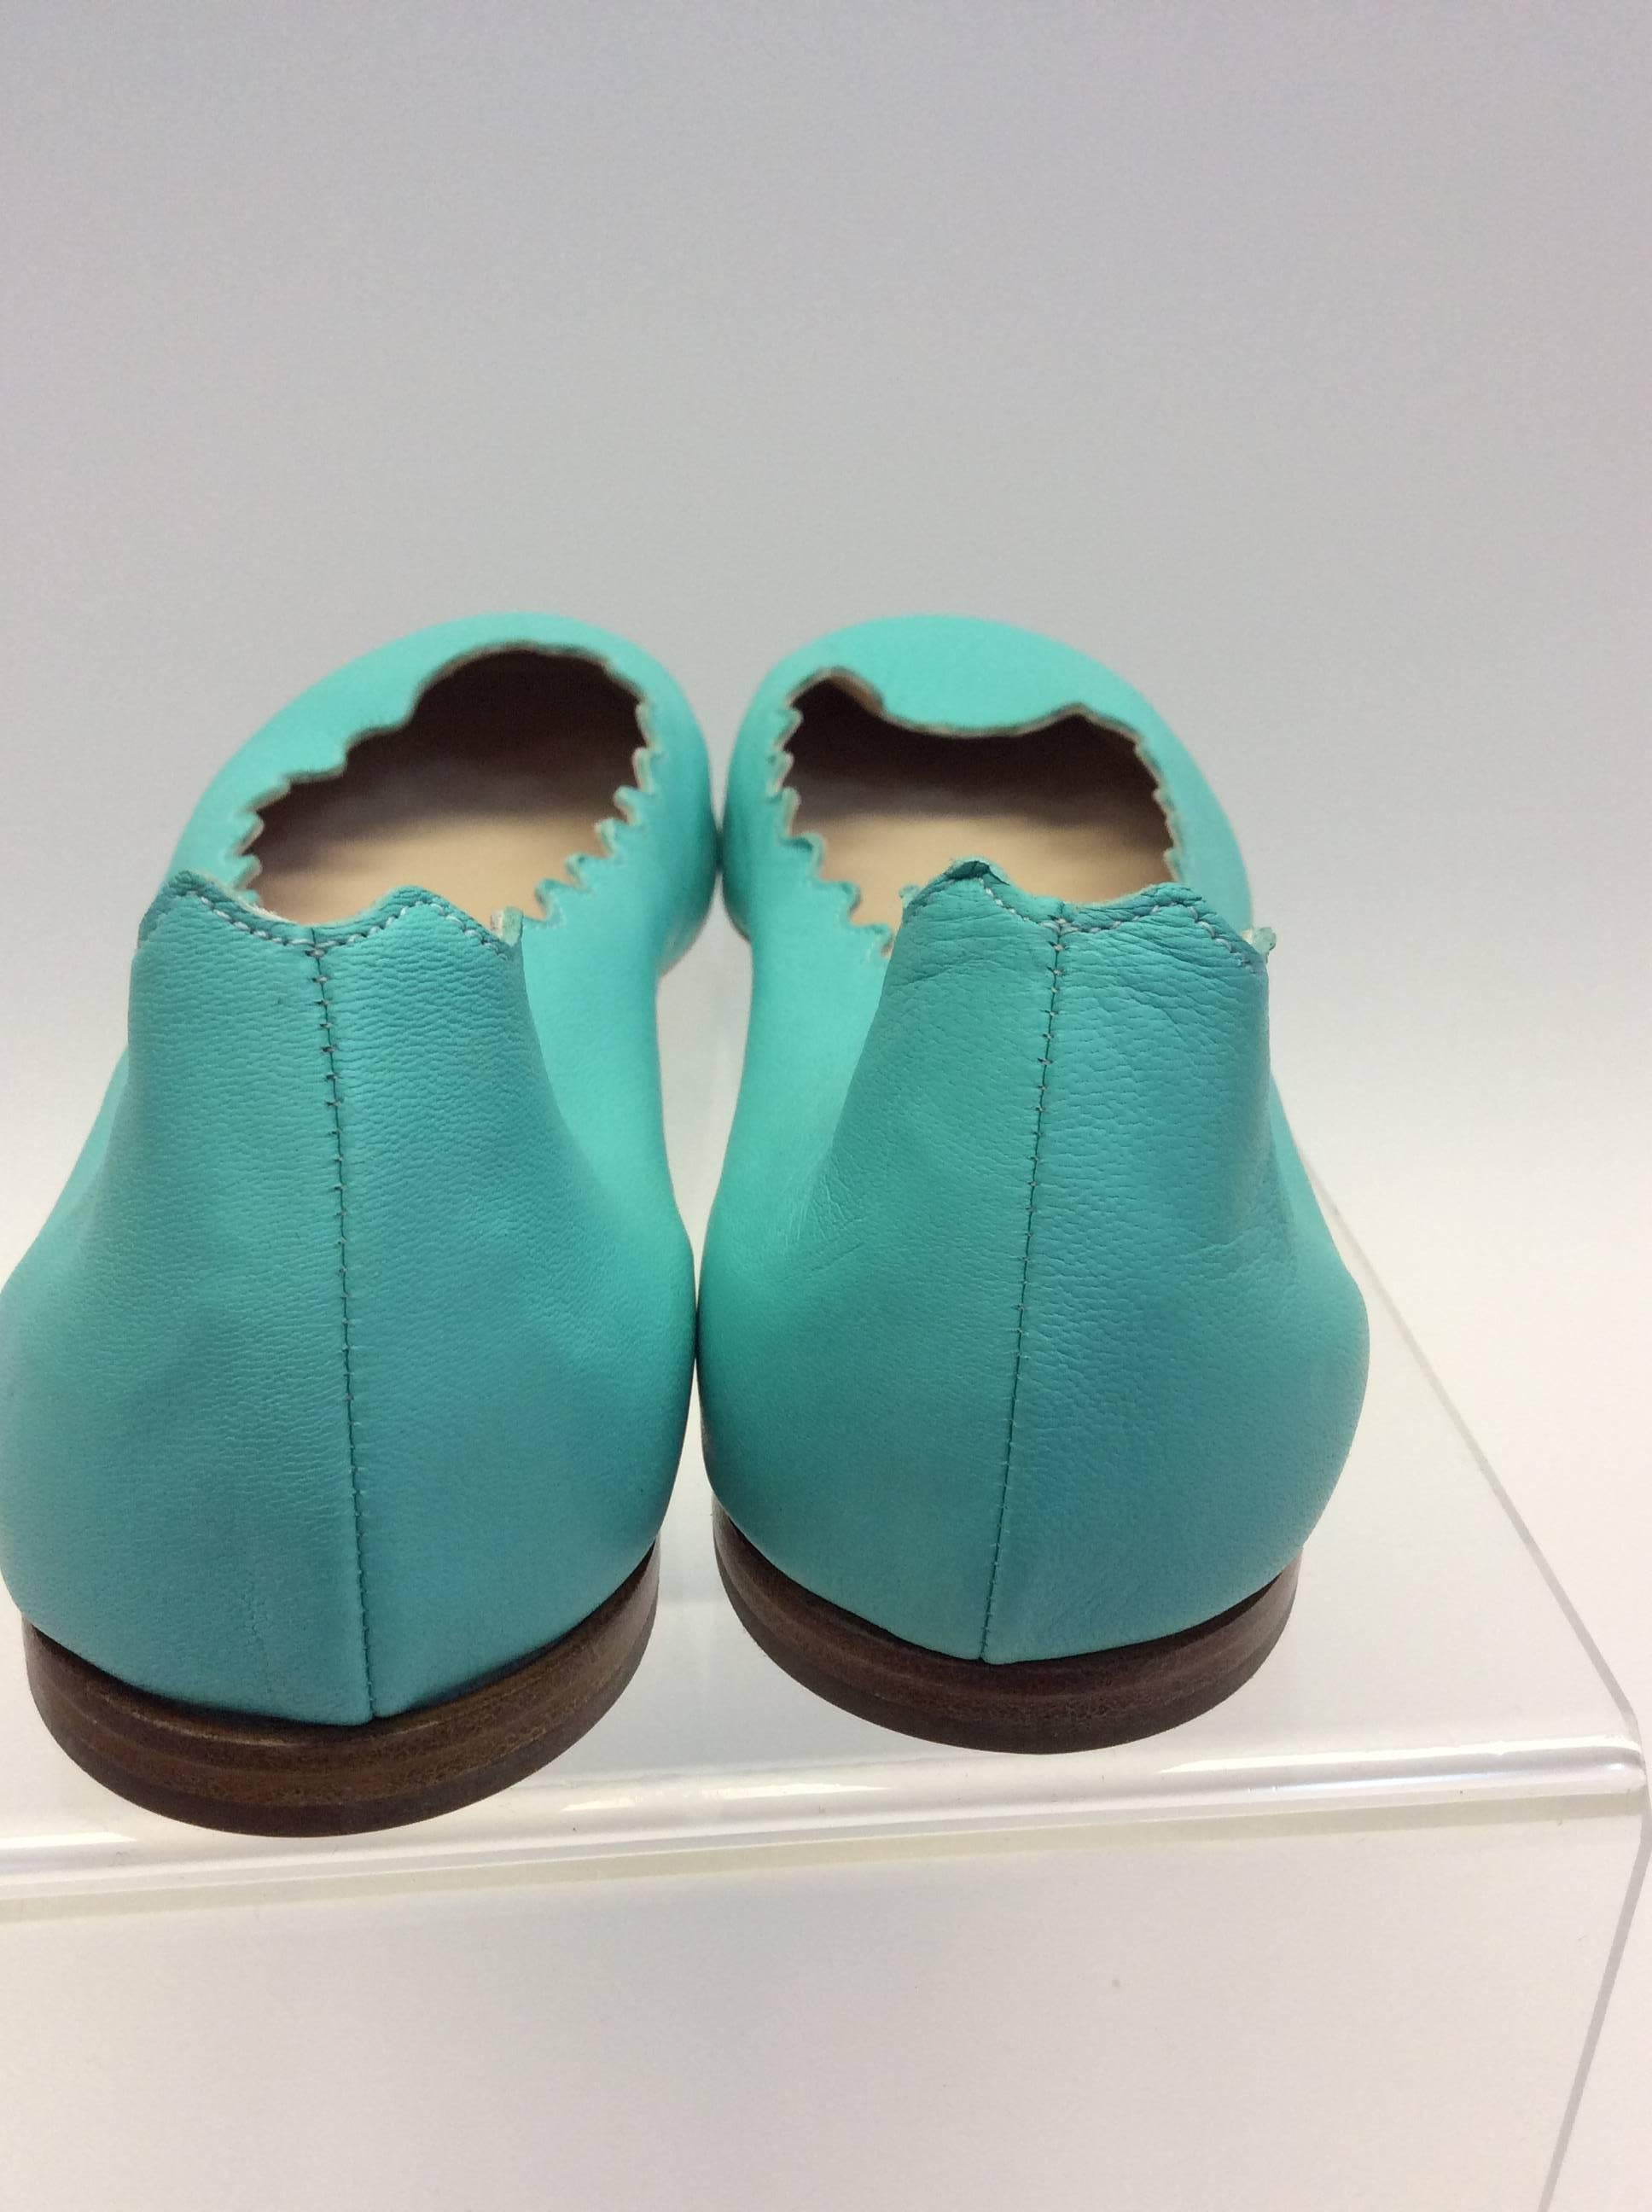 Chloe Green Leather Flats In New Condition For Sale In Narberth, PA